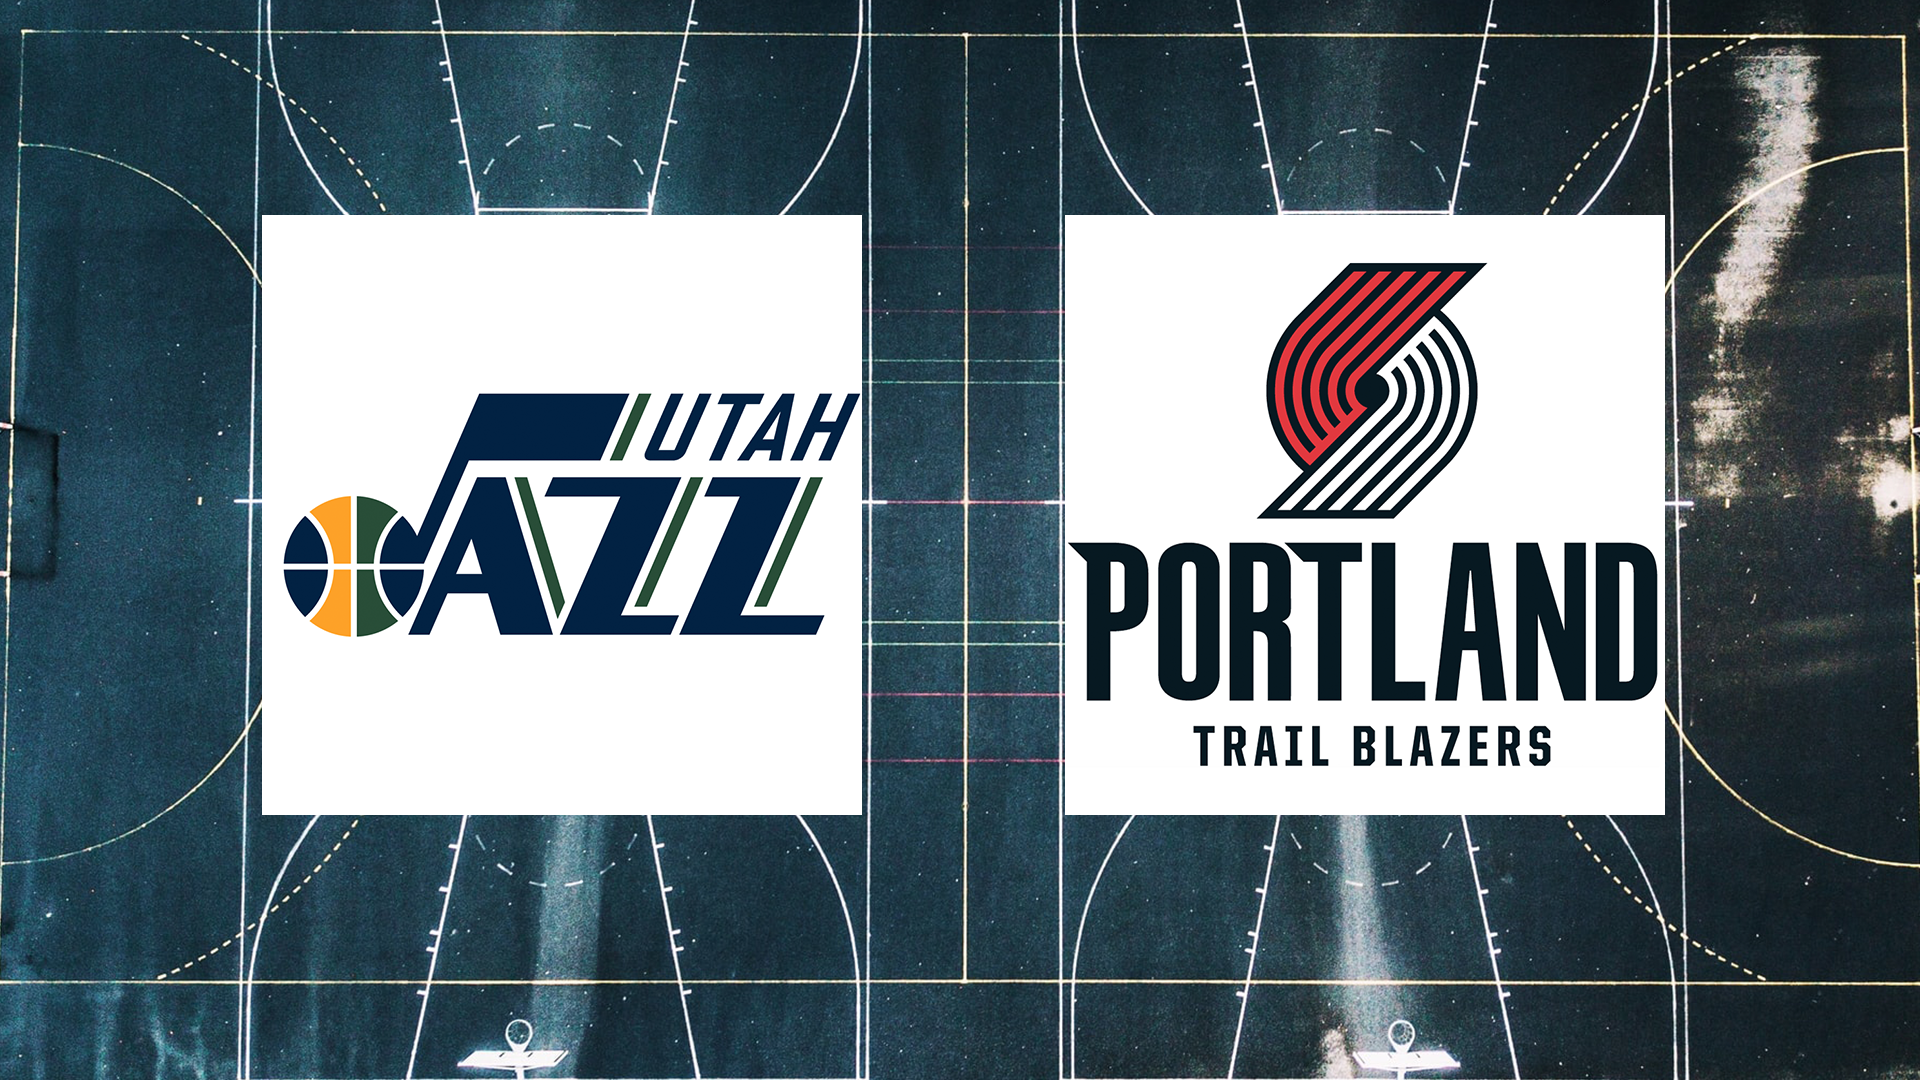 Portland Trail Blazers at Utah Jazz: Game preview, time, TV